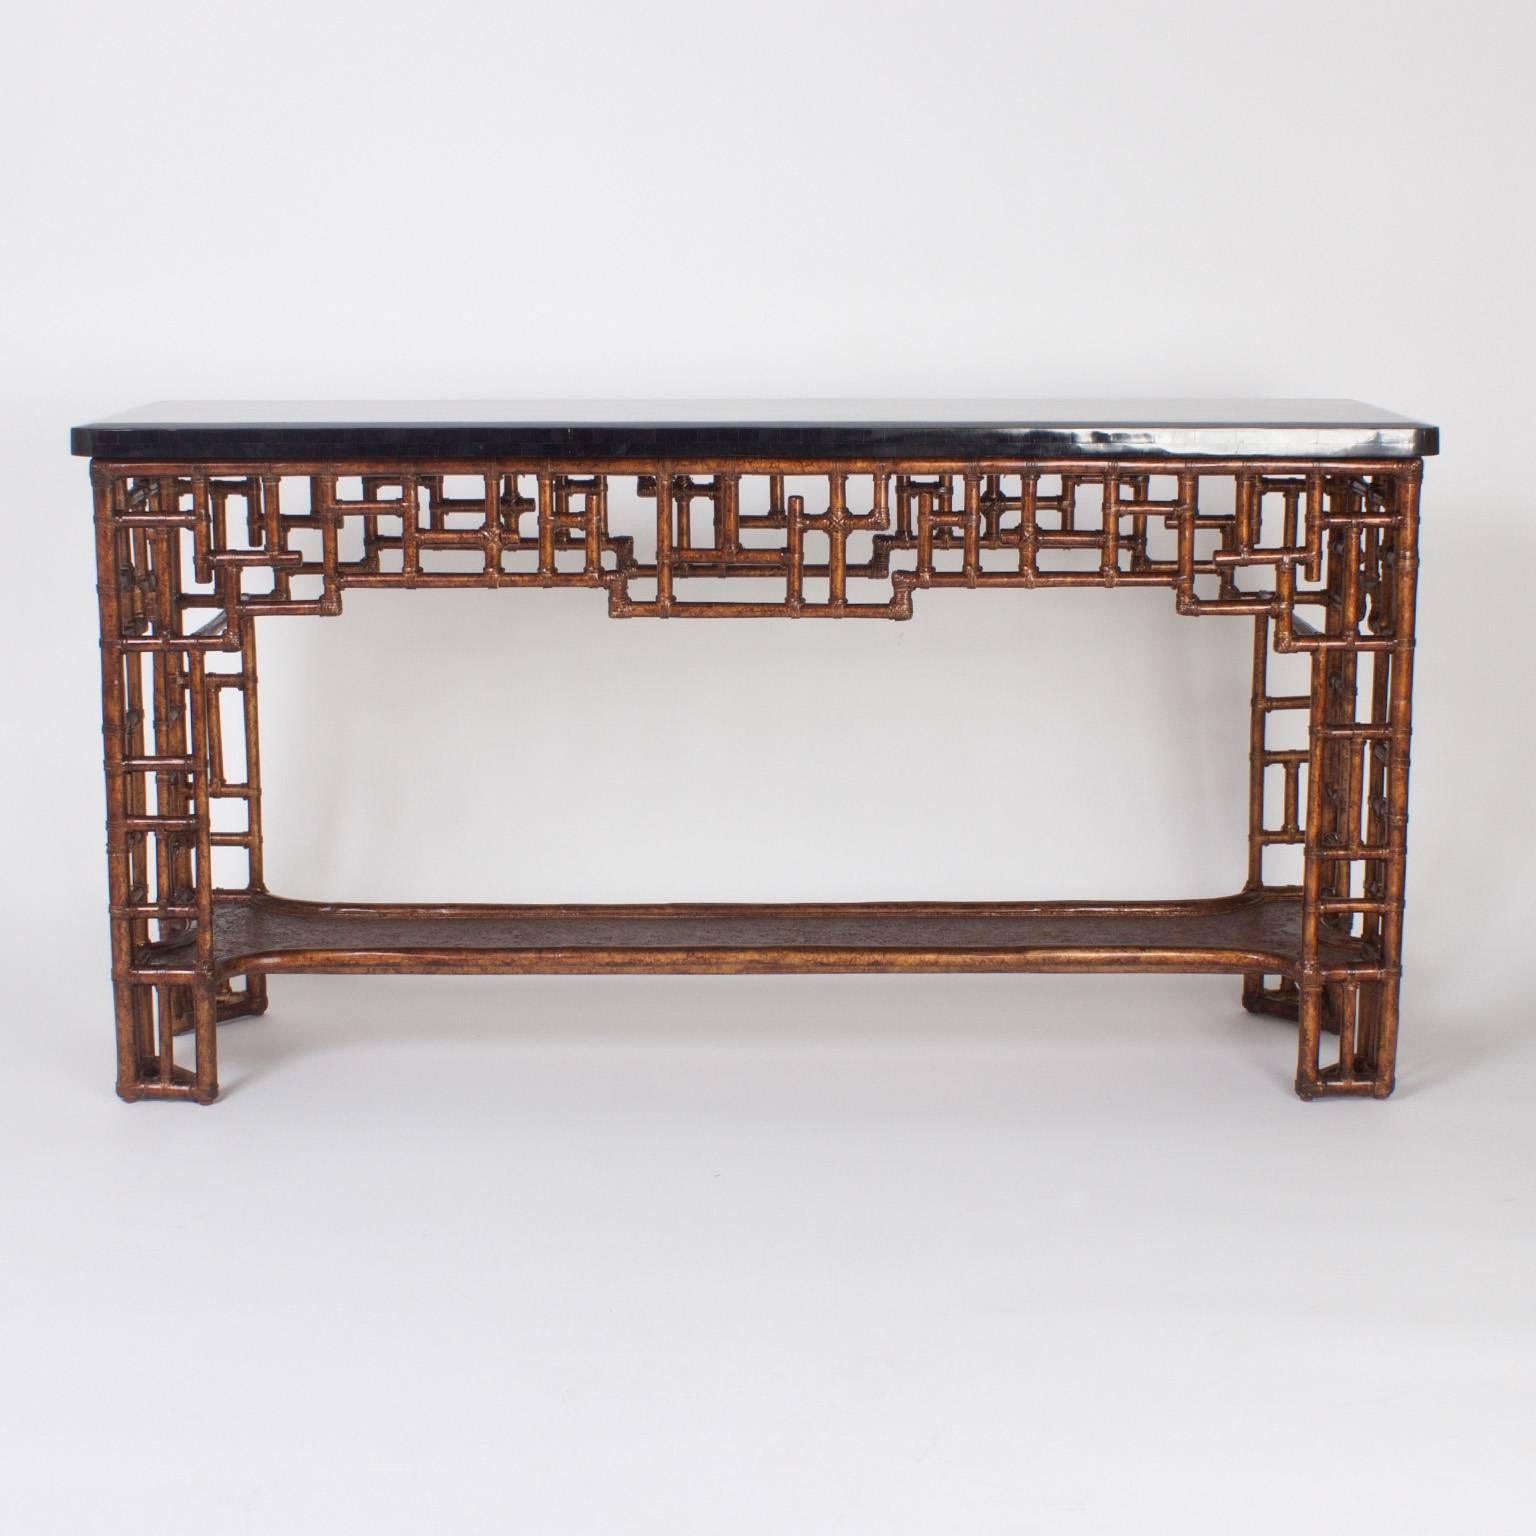 Maitland-Smith Mid-Century Chinese Chippendale console featuring a lacquered penshell top with an inlaid geometric design. The faux bamboo base is crafted with metal and supports a sculptural lower tier. Superior quality and design make this piece a